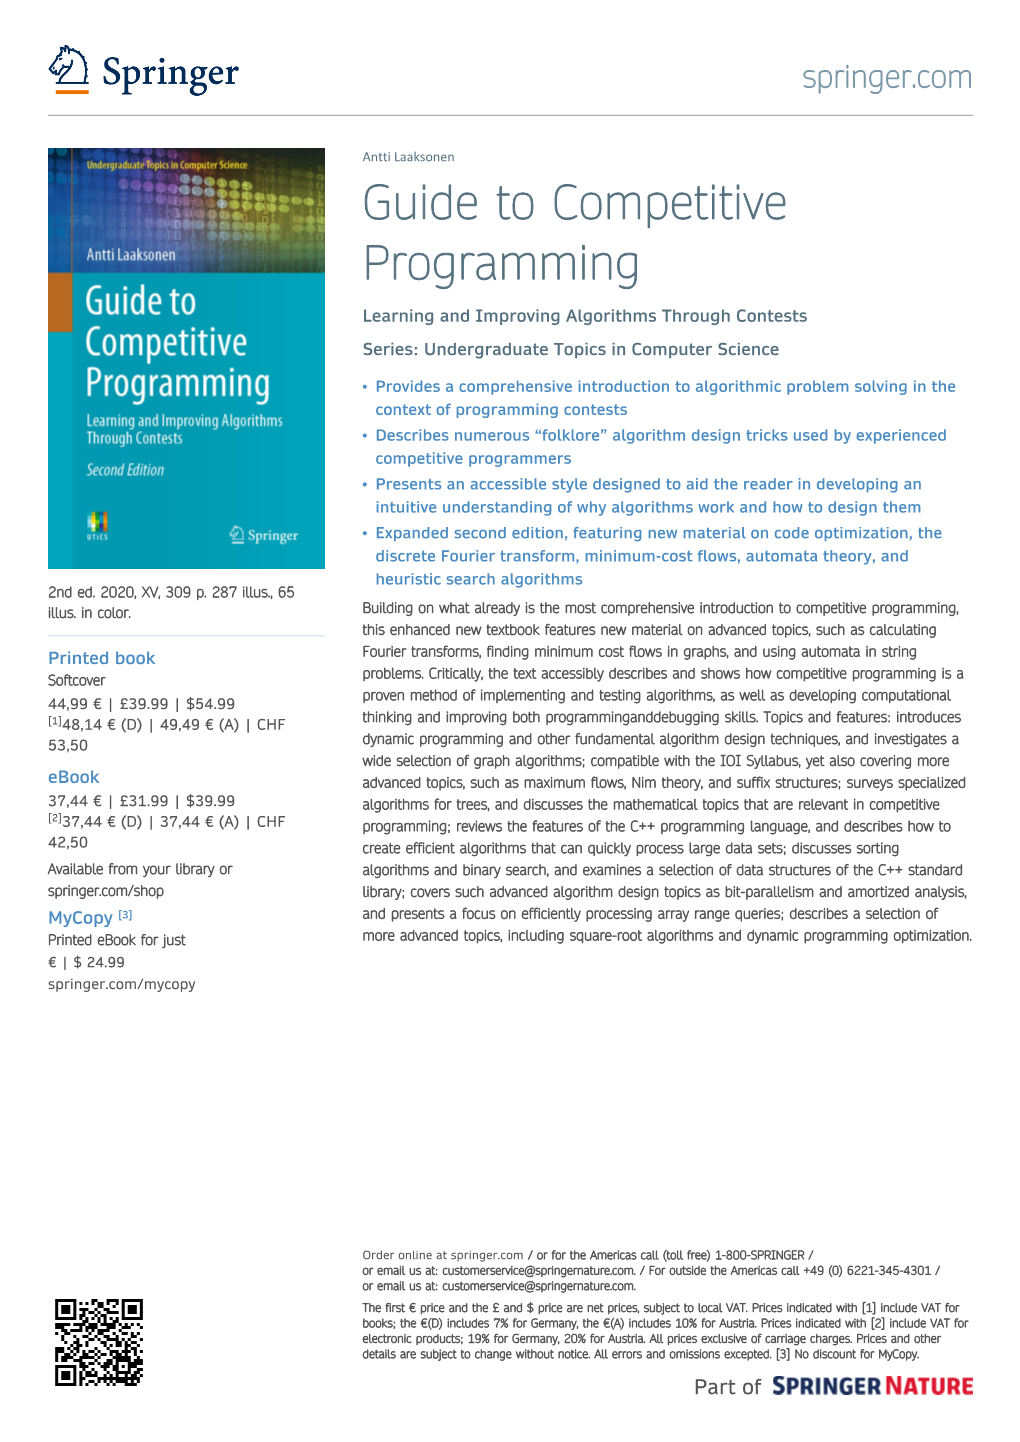 Guide to Competitive Programming Learning and Improving Algorithms Through Contests Series: Undergraduate Topics in Computer Science